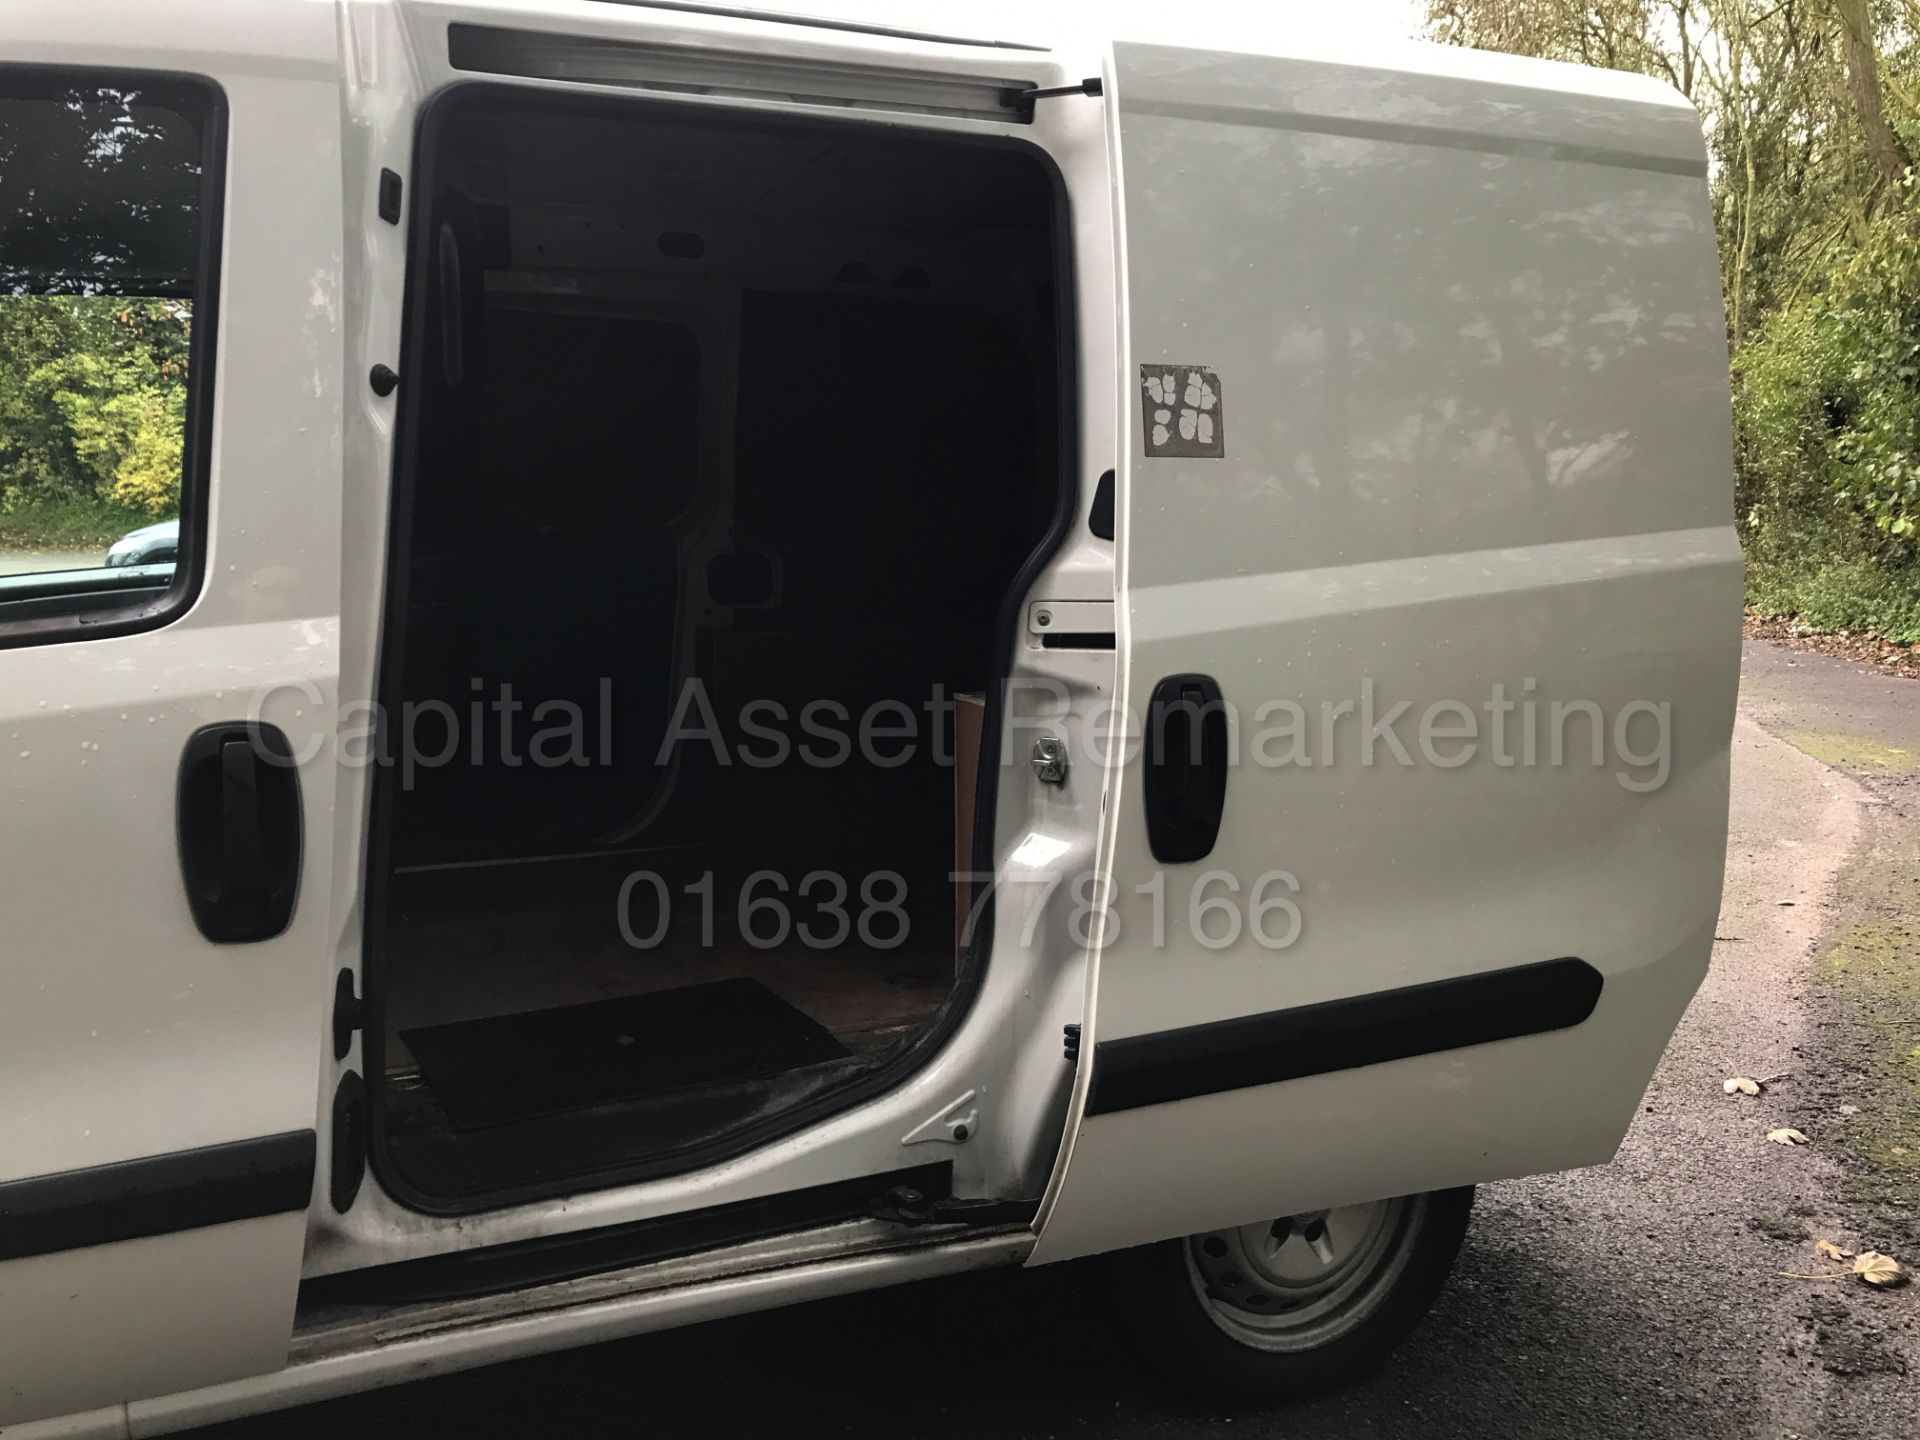 VAUXHALL COMBO 2000 L1H1 (2015 MODEL) 'CDTI - 90 BHP' (1 FORMER COMPANY OWNER FROM NEW) *50 MPG+* - Image 15 of 25